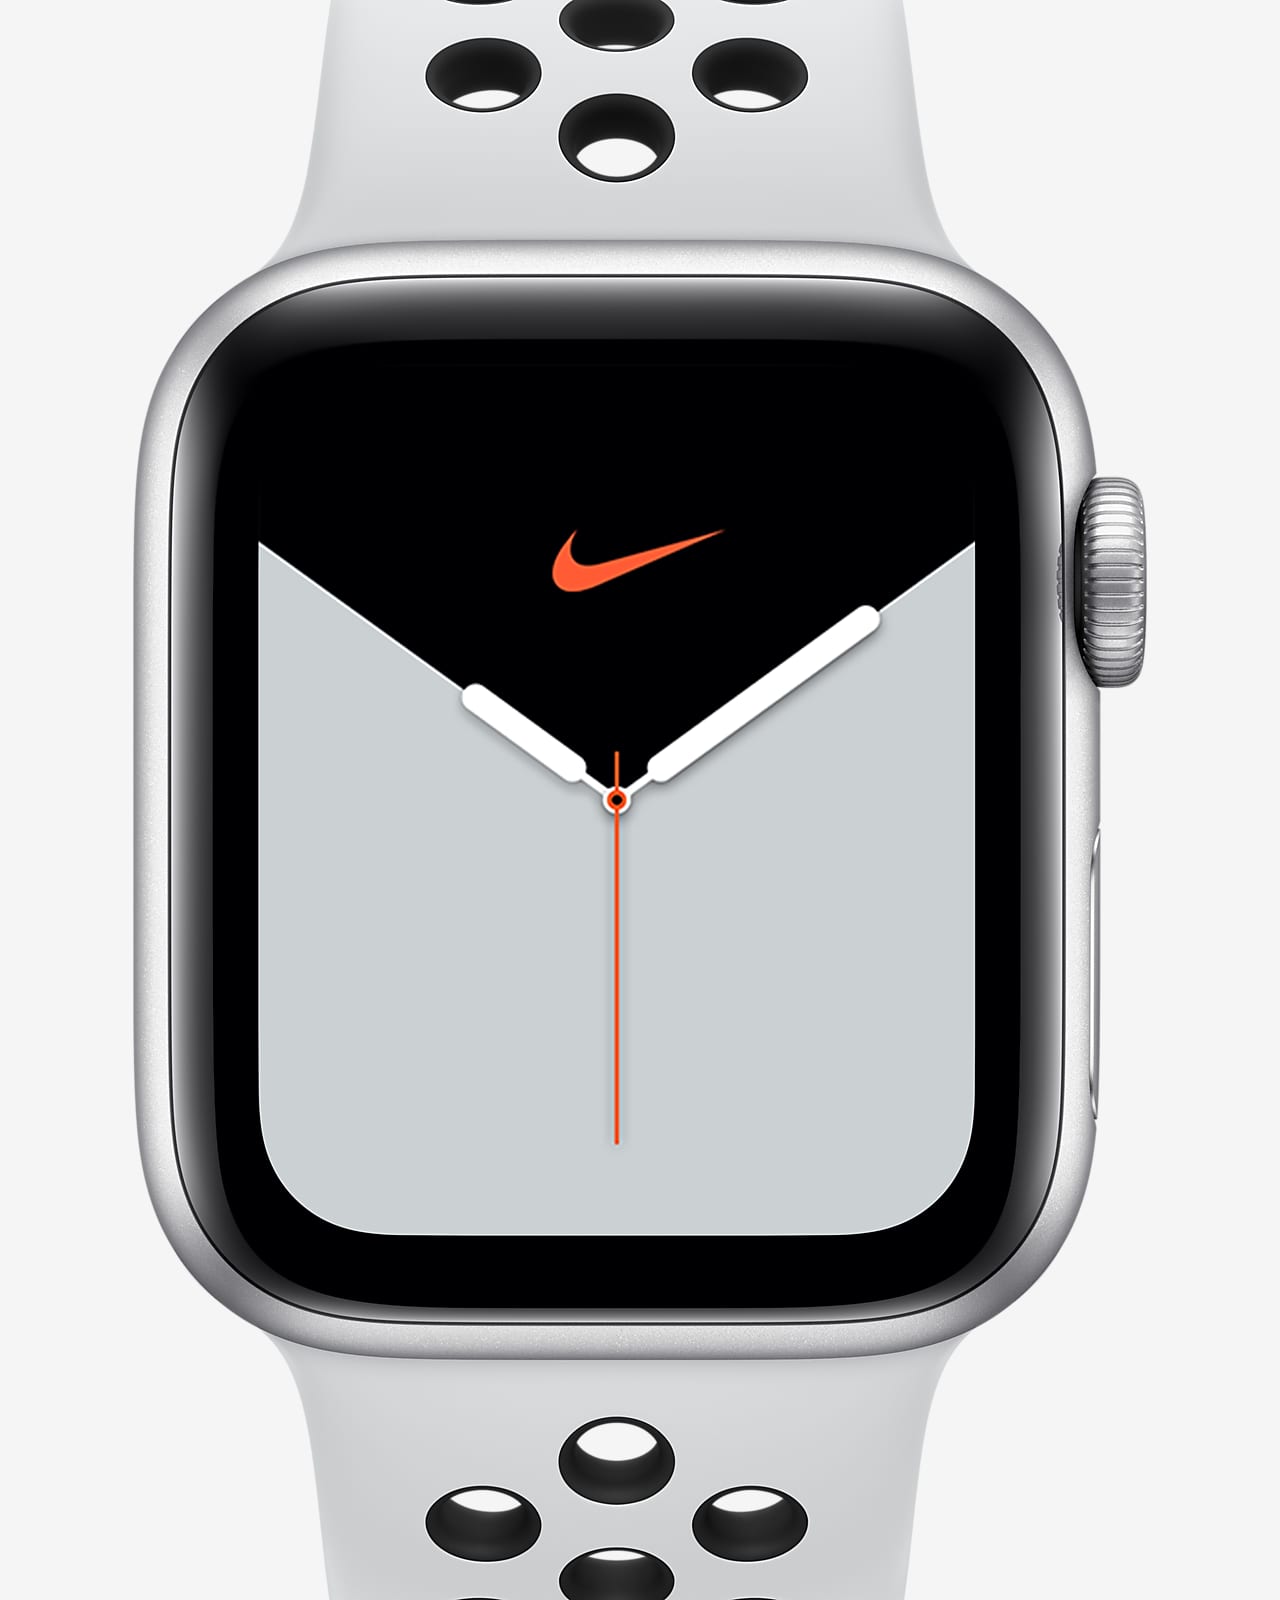 https://static.nike.com/a/images/t_PDP_1280_v1/f_auto,q_auto:eco/d3379bfd-d662-4412-8b3d-6d0d56d6dd01/apple-watch-series-5-with-nike-sport-band-open-box-40mm-silver-aluminium-case-xZL3TK.png